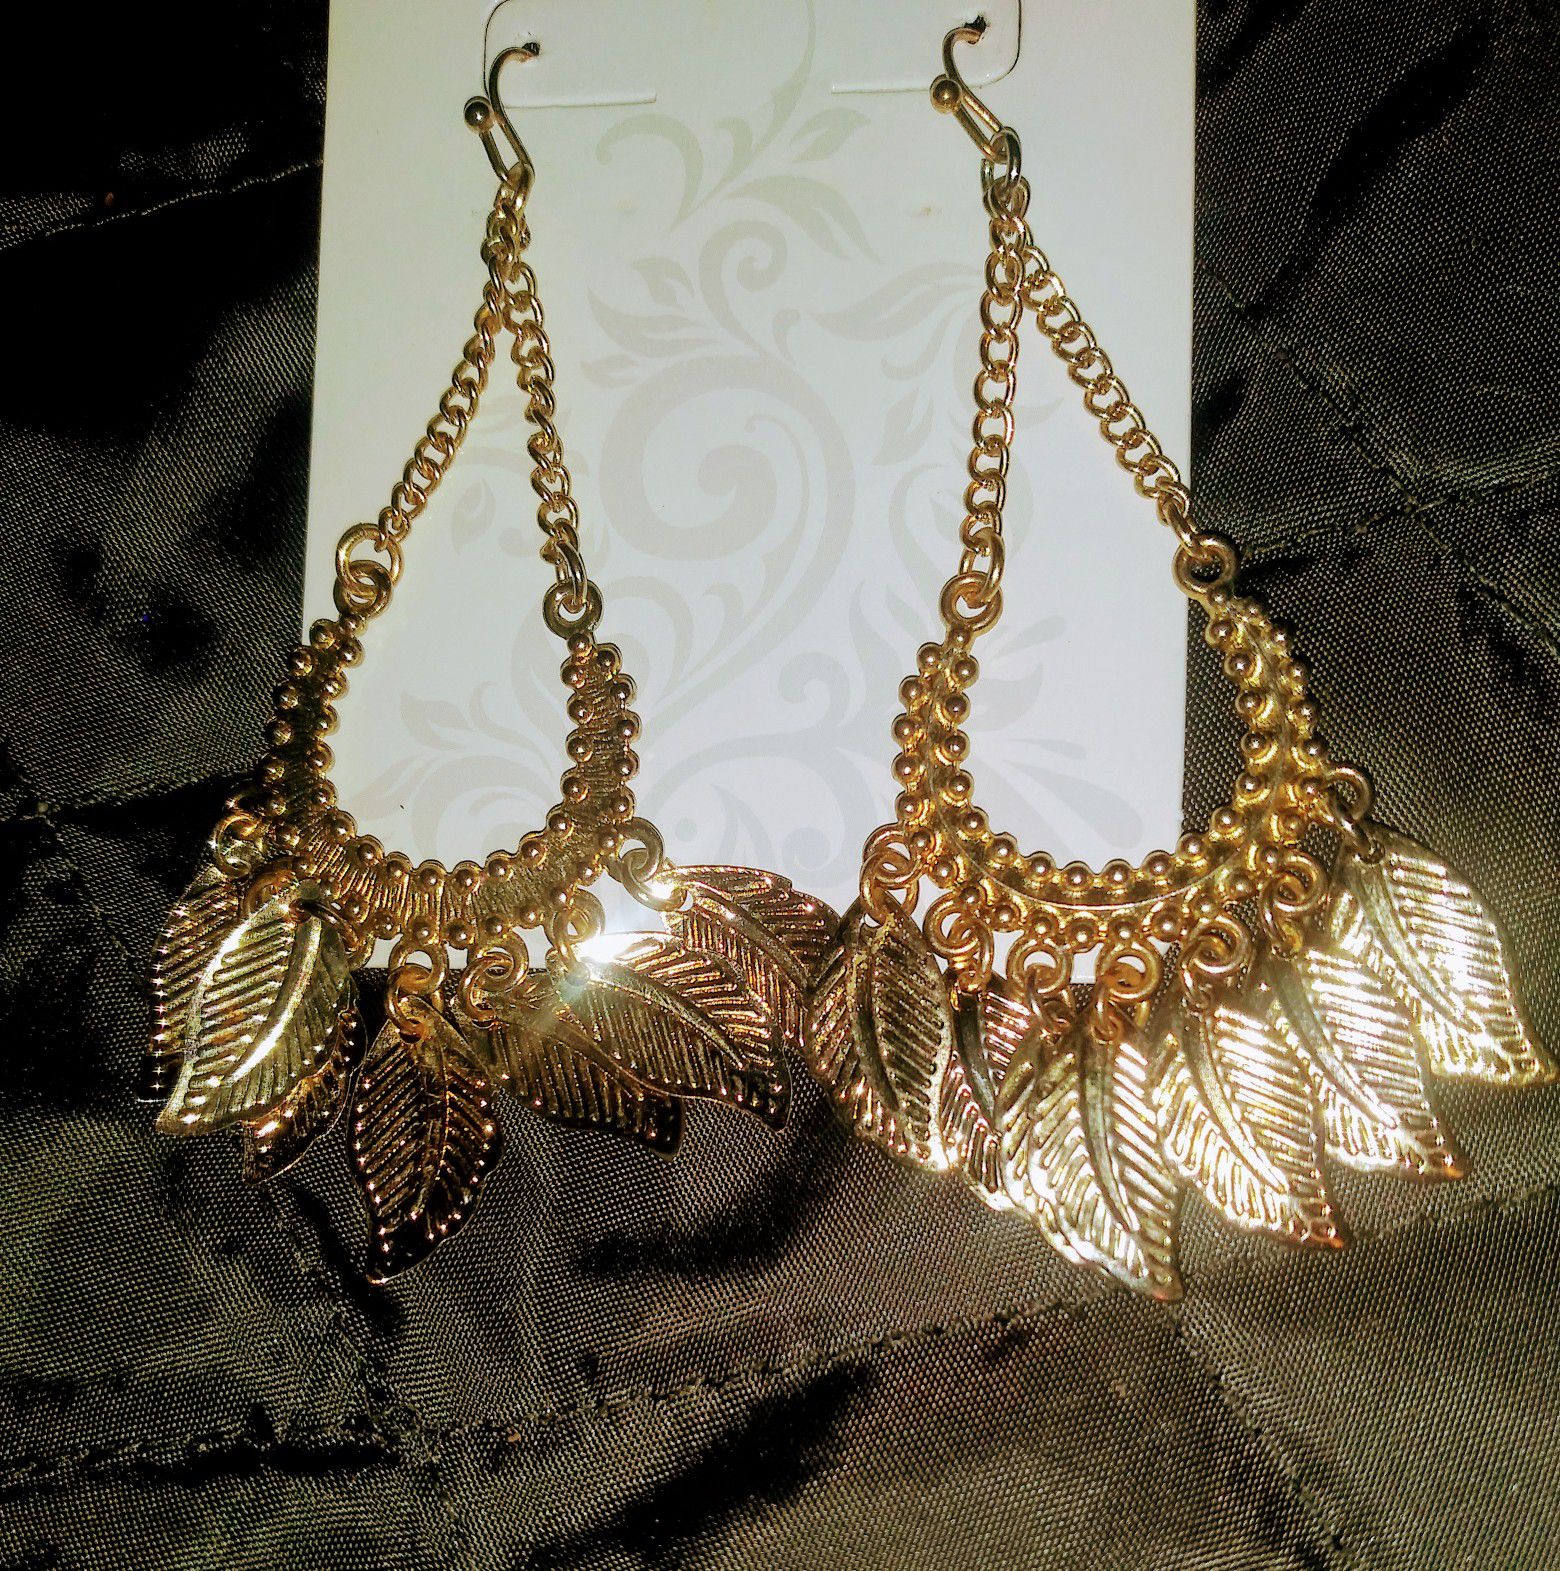 Chain Link Dangle Earrings With Feather Charm Accents